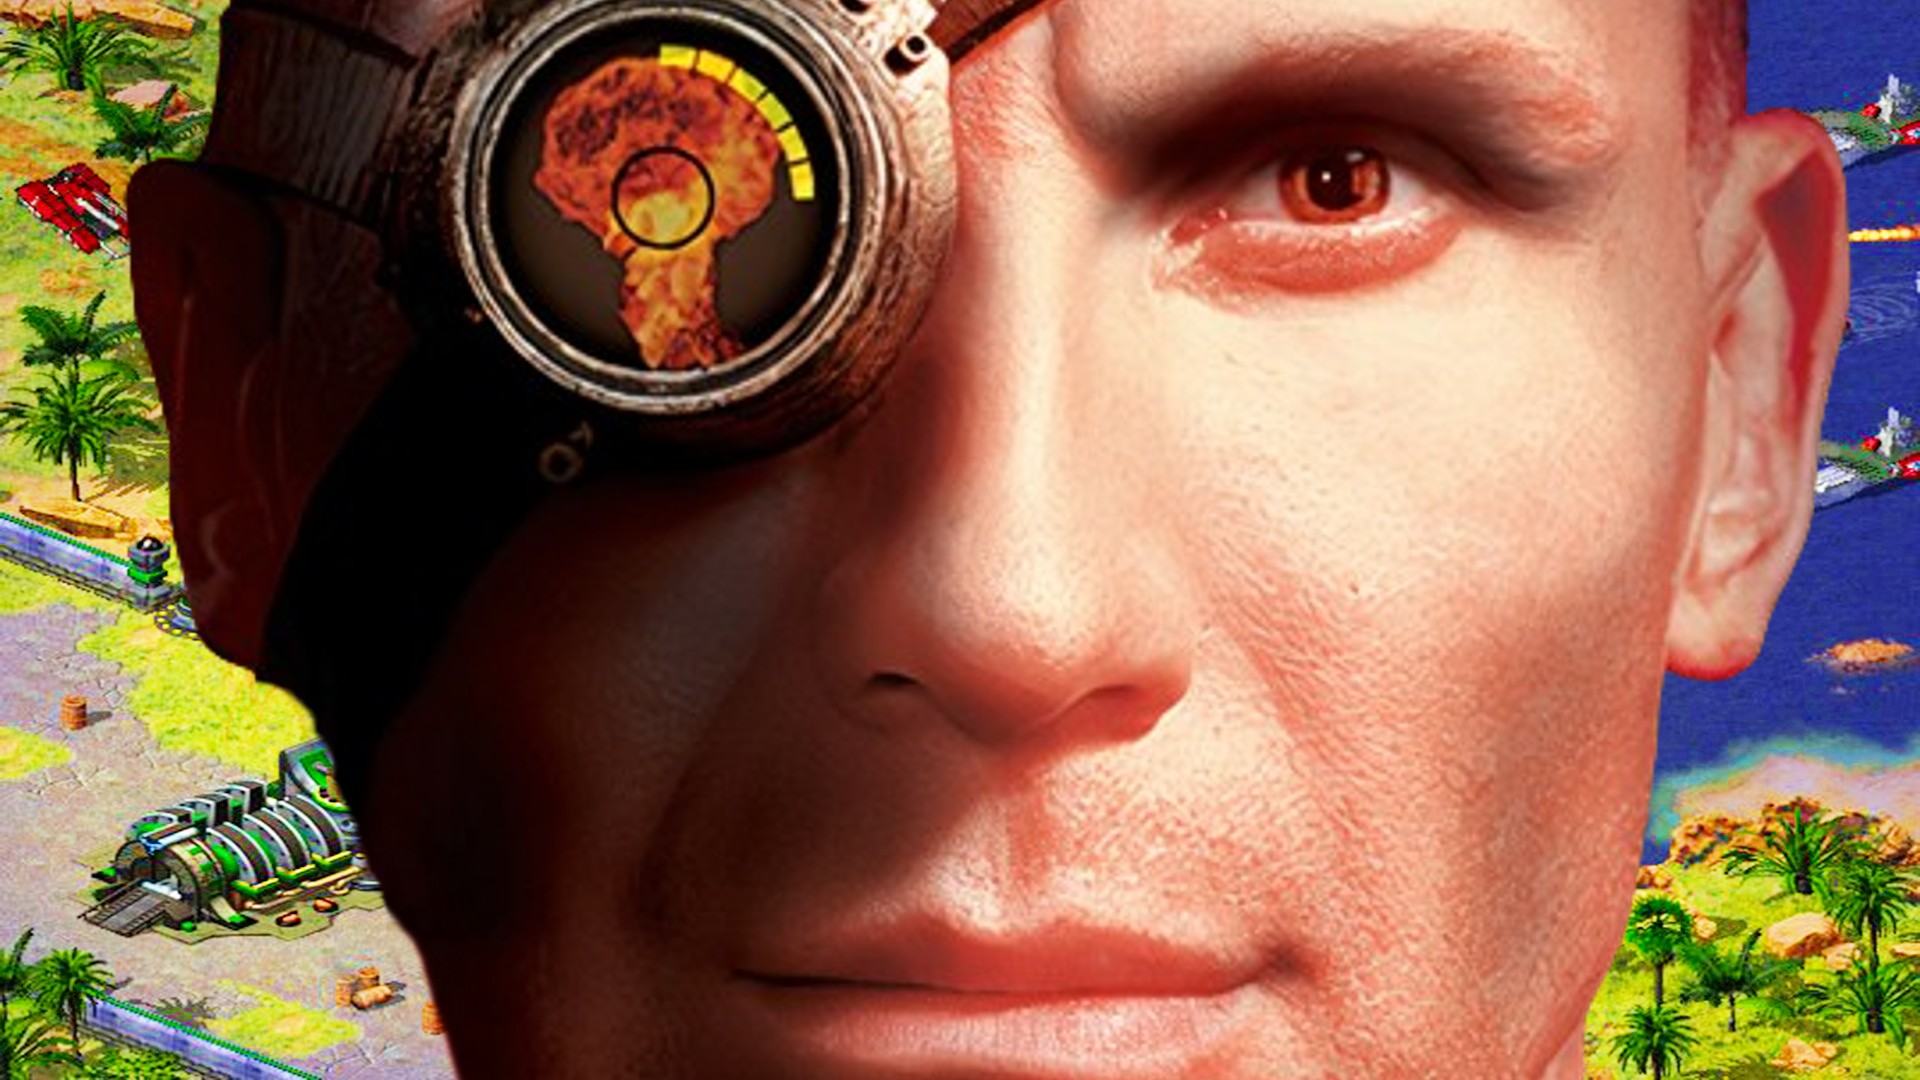 New Command and Conquer remasters could be coming, as EA drops hint